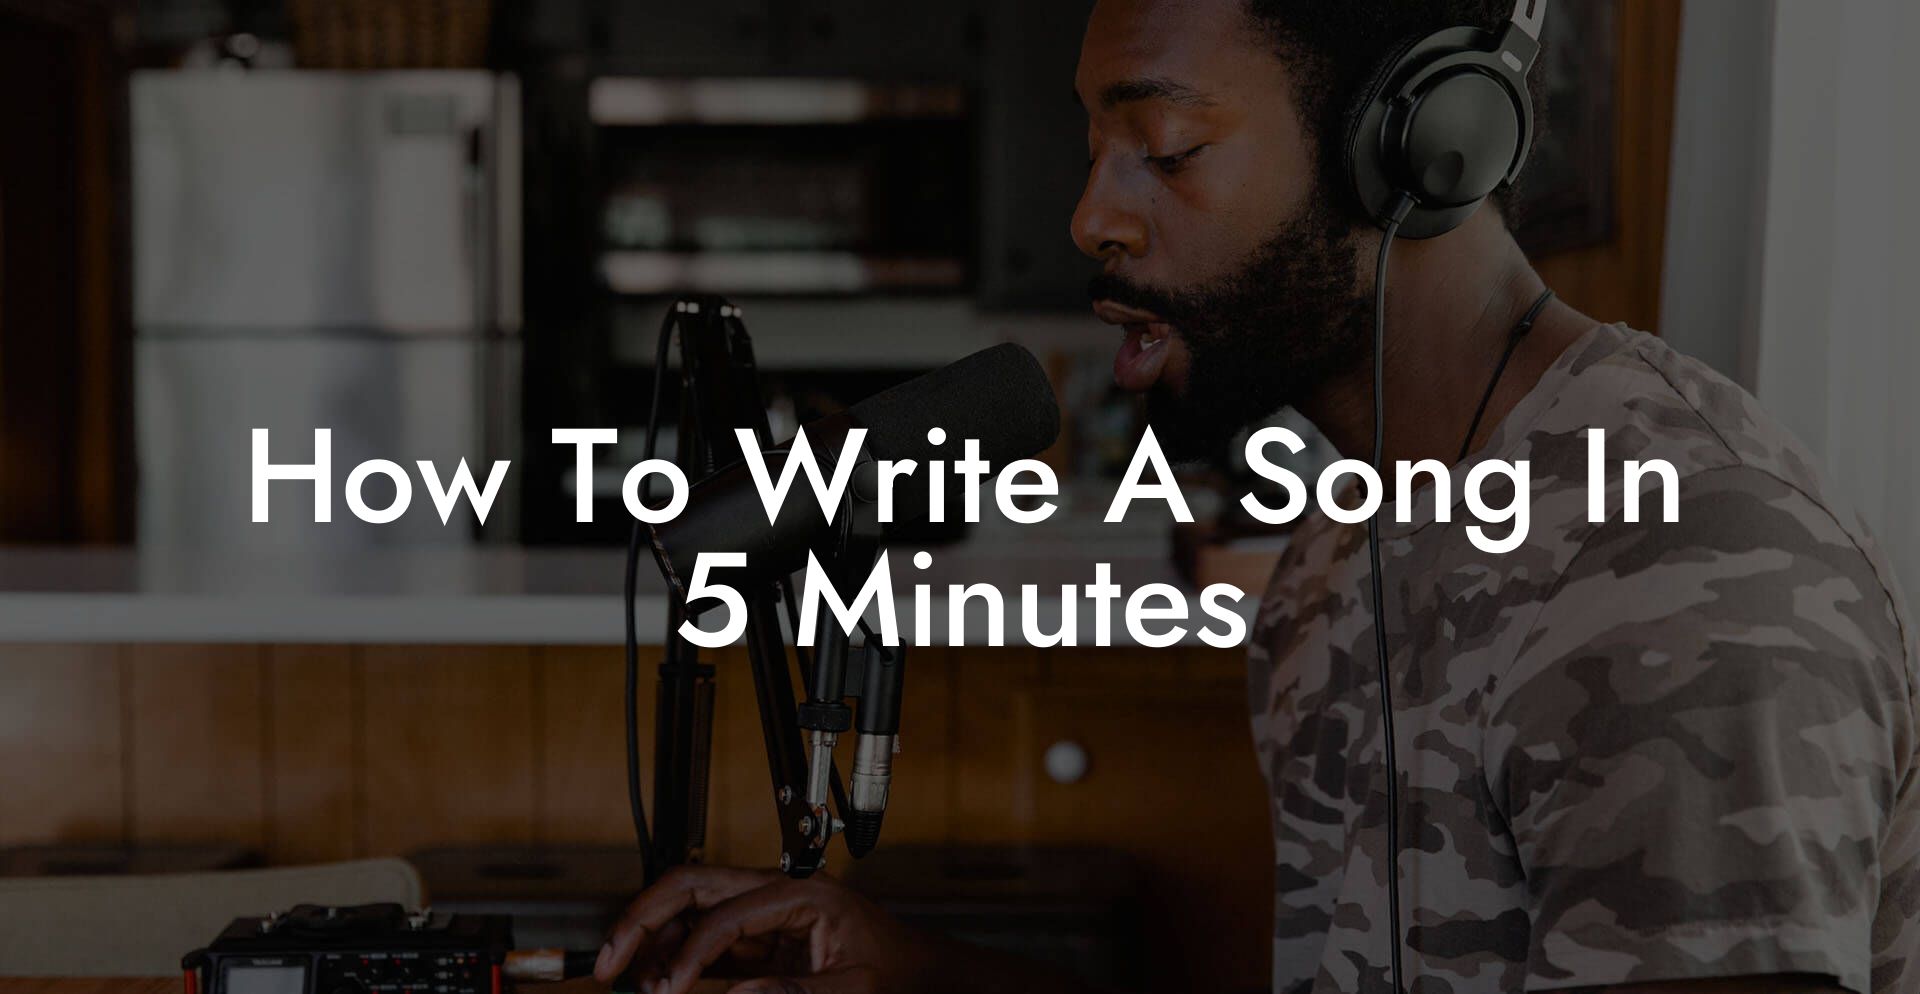 how to write a song in 5 minutes lyric assistant